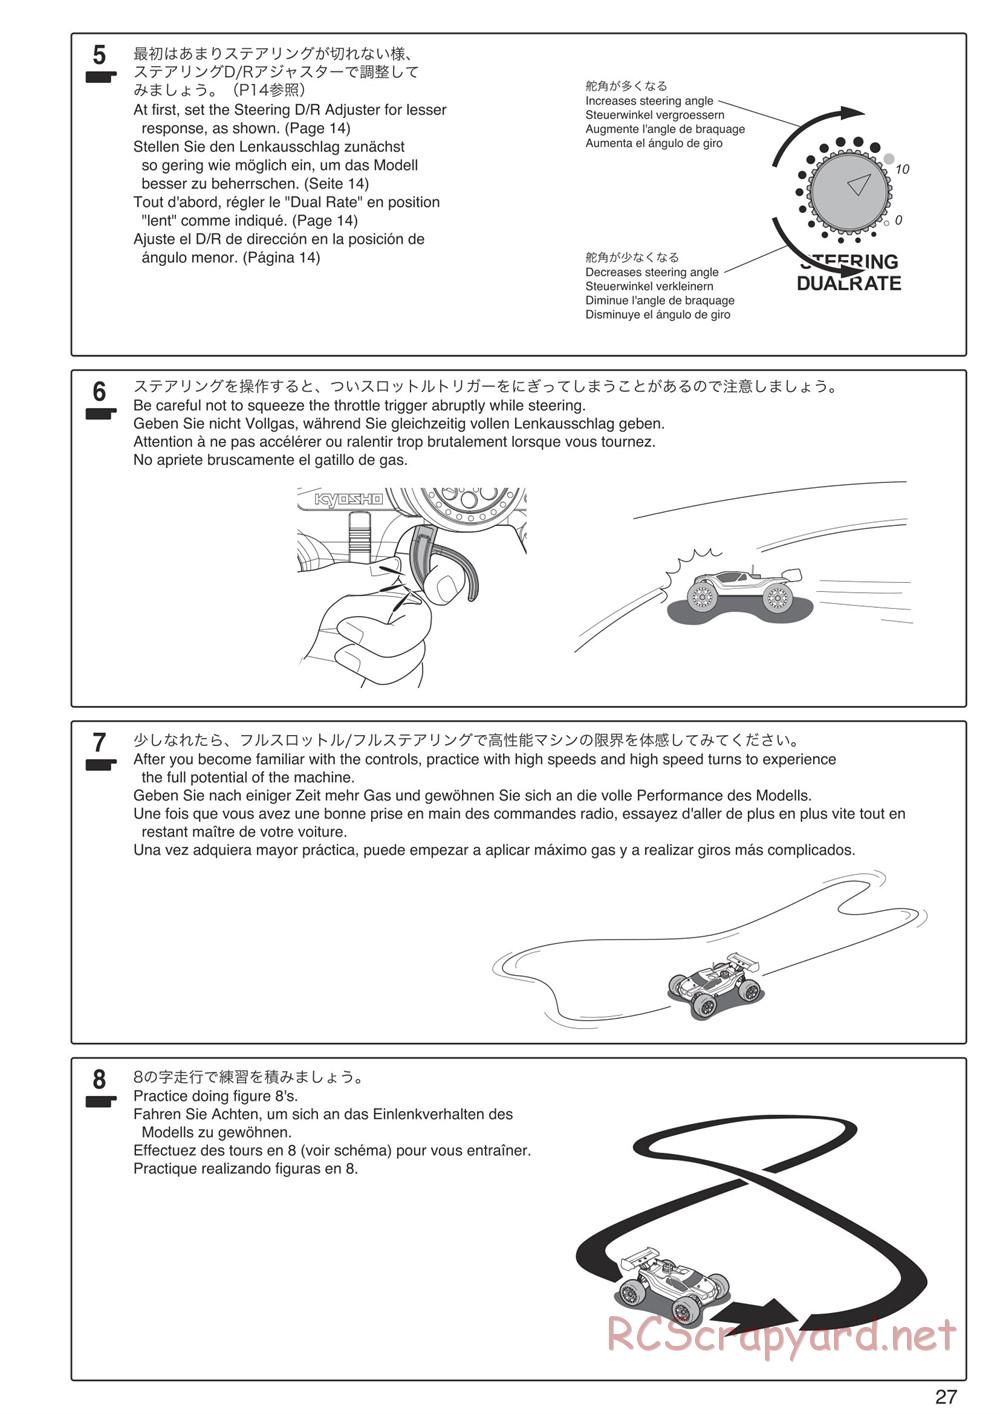 Kyosho - Inferno Neo ST 3.0 - Manual - Page 27